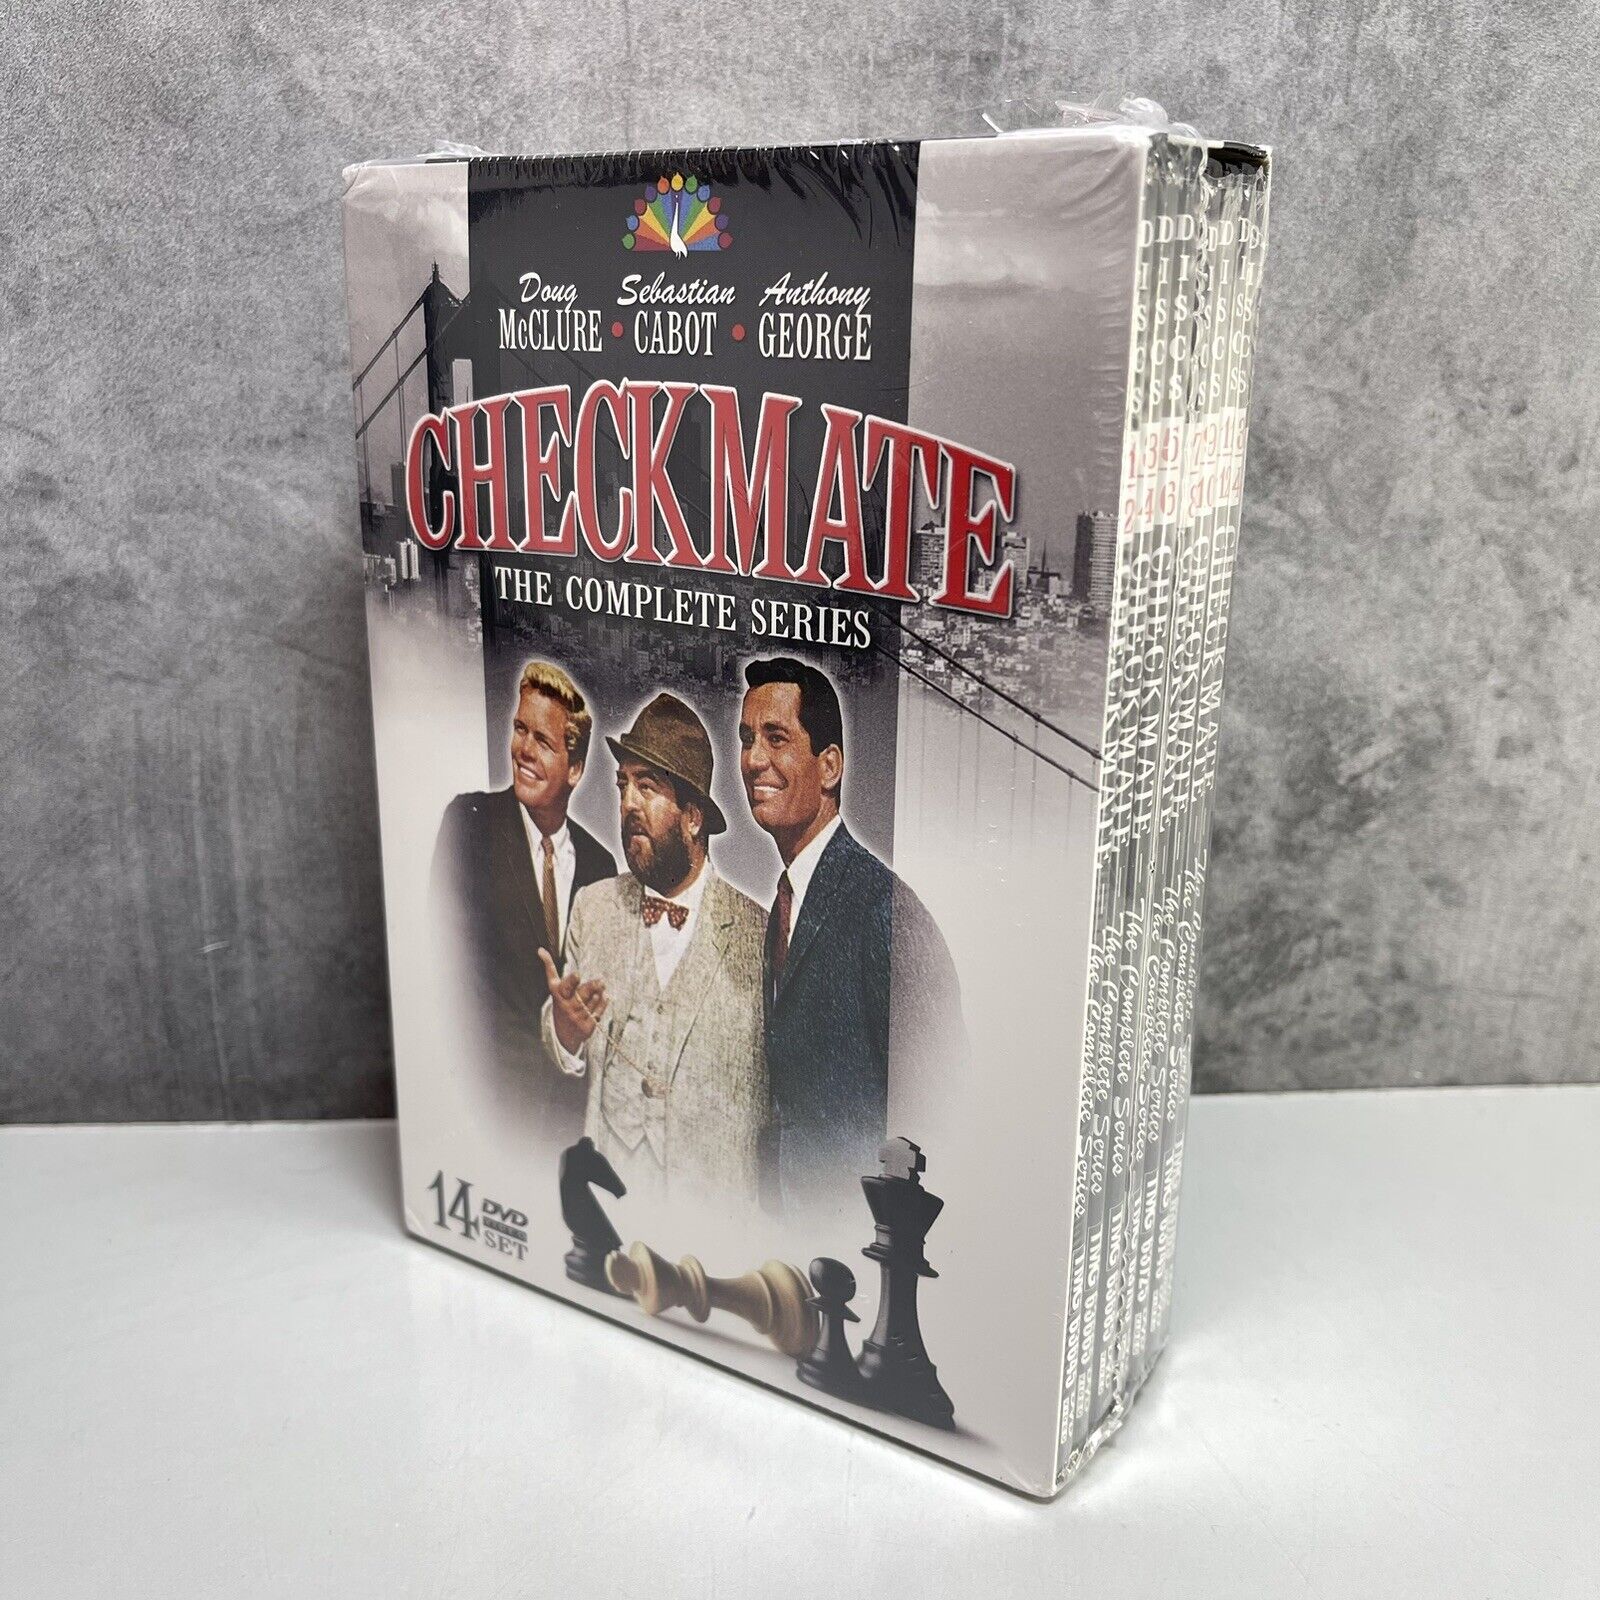 Checkmate - The Complete Series (1960-1962 B&W) DVD 2010 14-Disc Set NEW SEALED